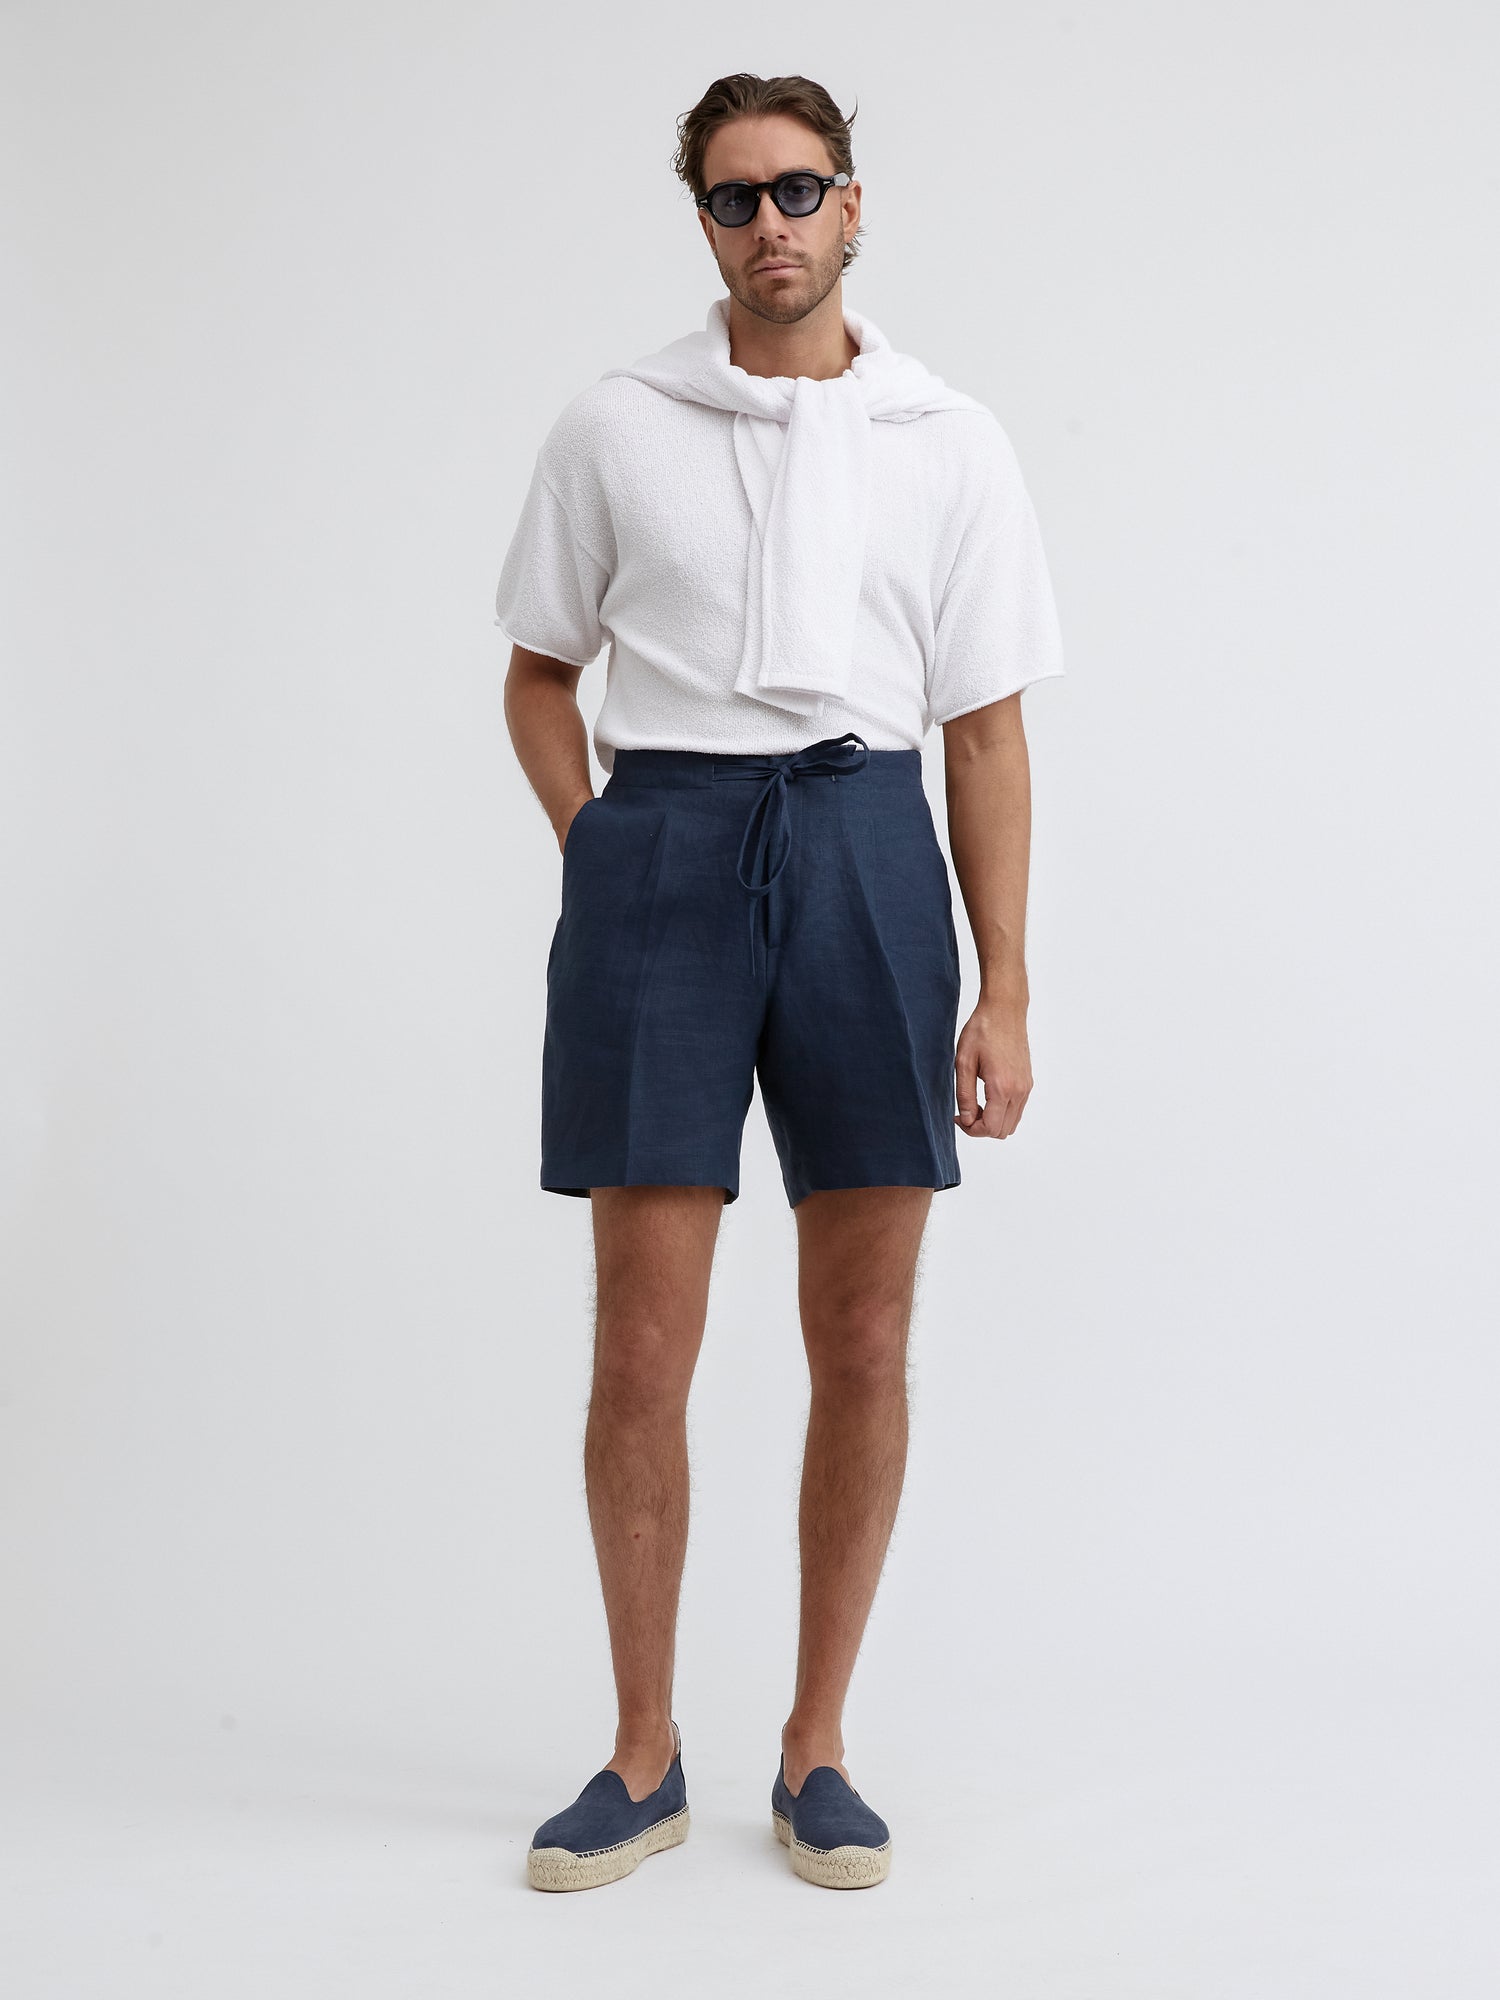 Navy Linen Drawstring Shorts (Wide Fit) - Grand Le Mar